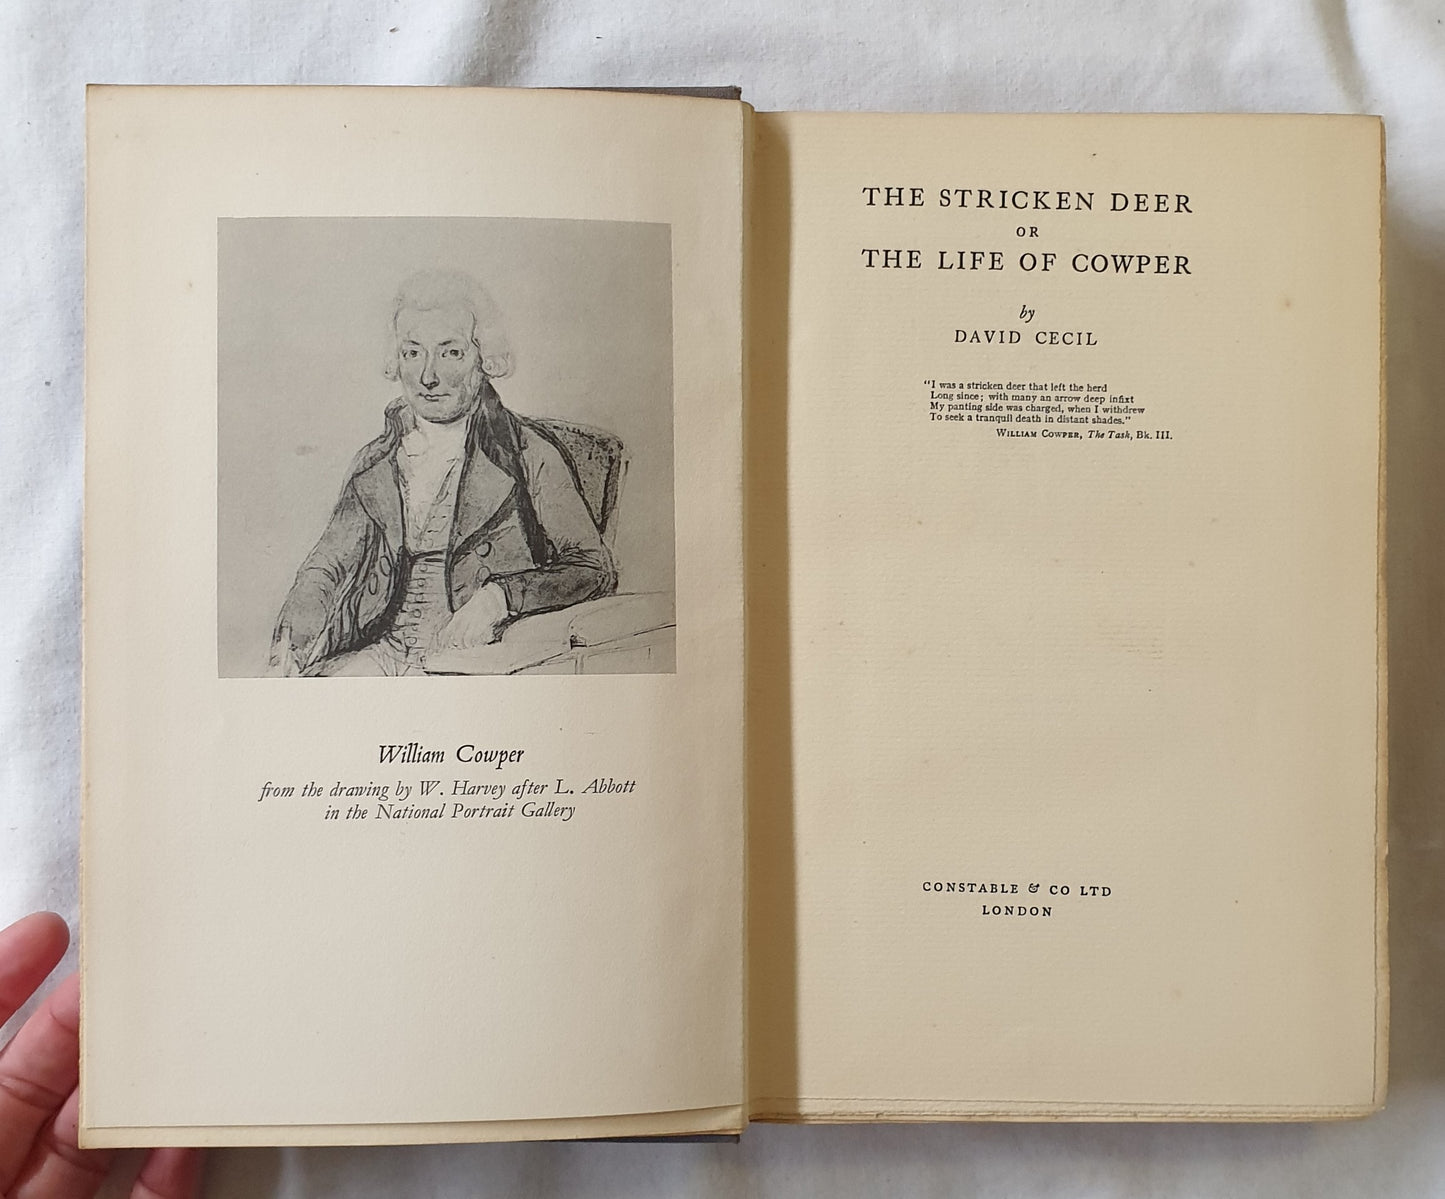 The Stricken Deer or The Life of Cowper by David Cecil